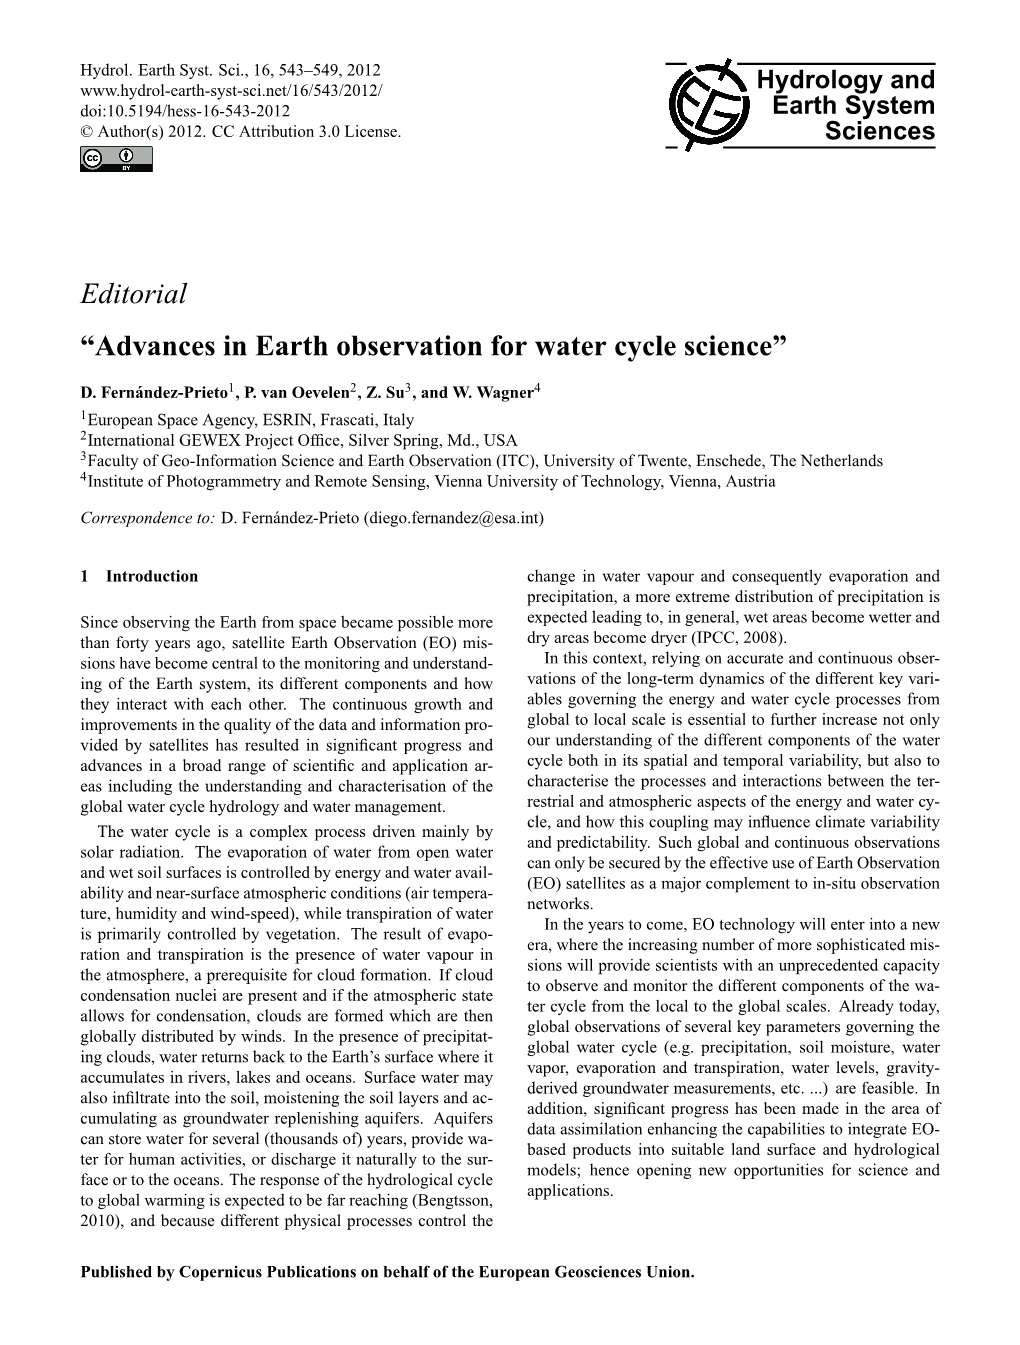 Editorial “Advances in Earth Observation for Water Cycle Science”